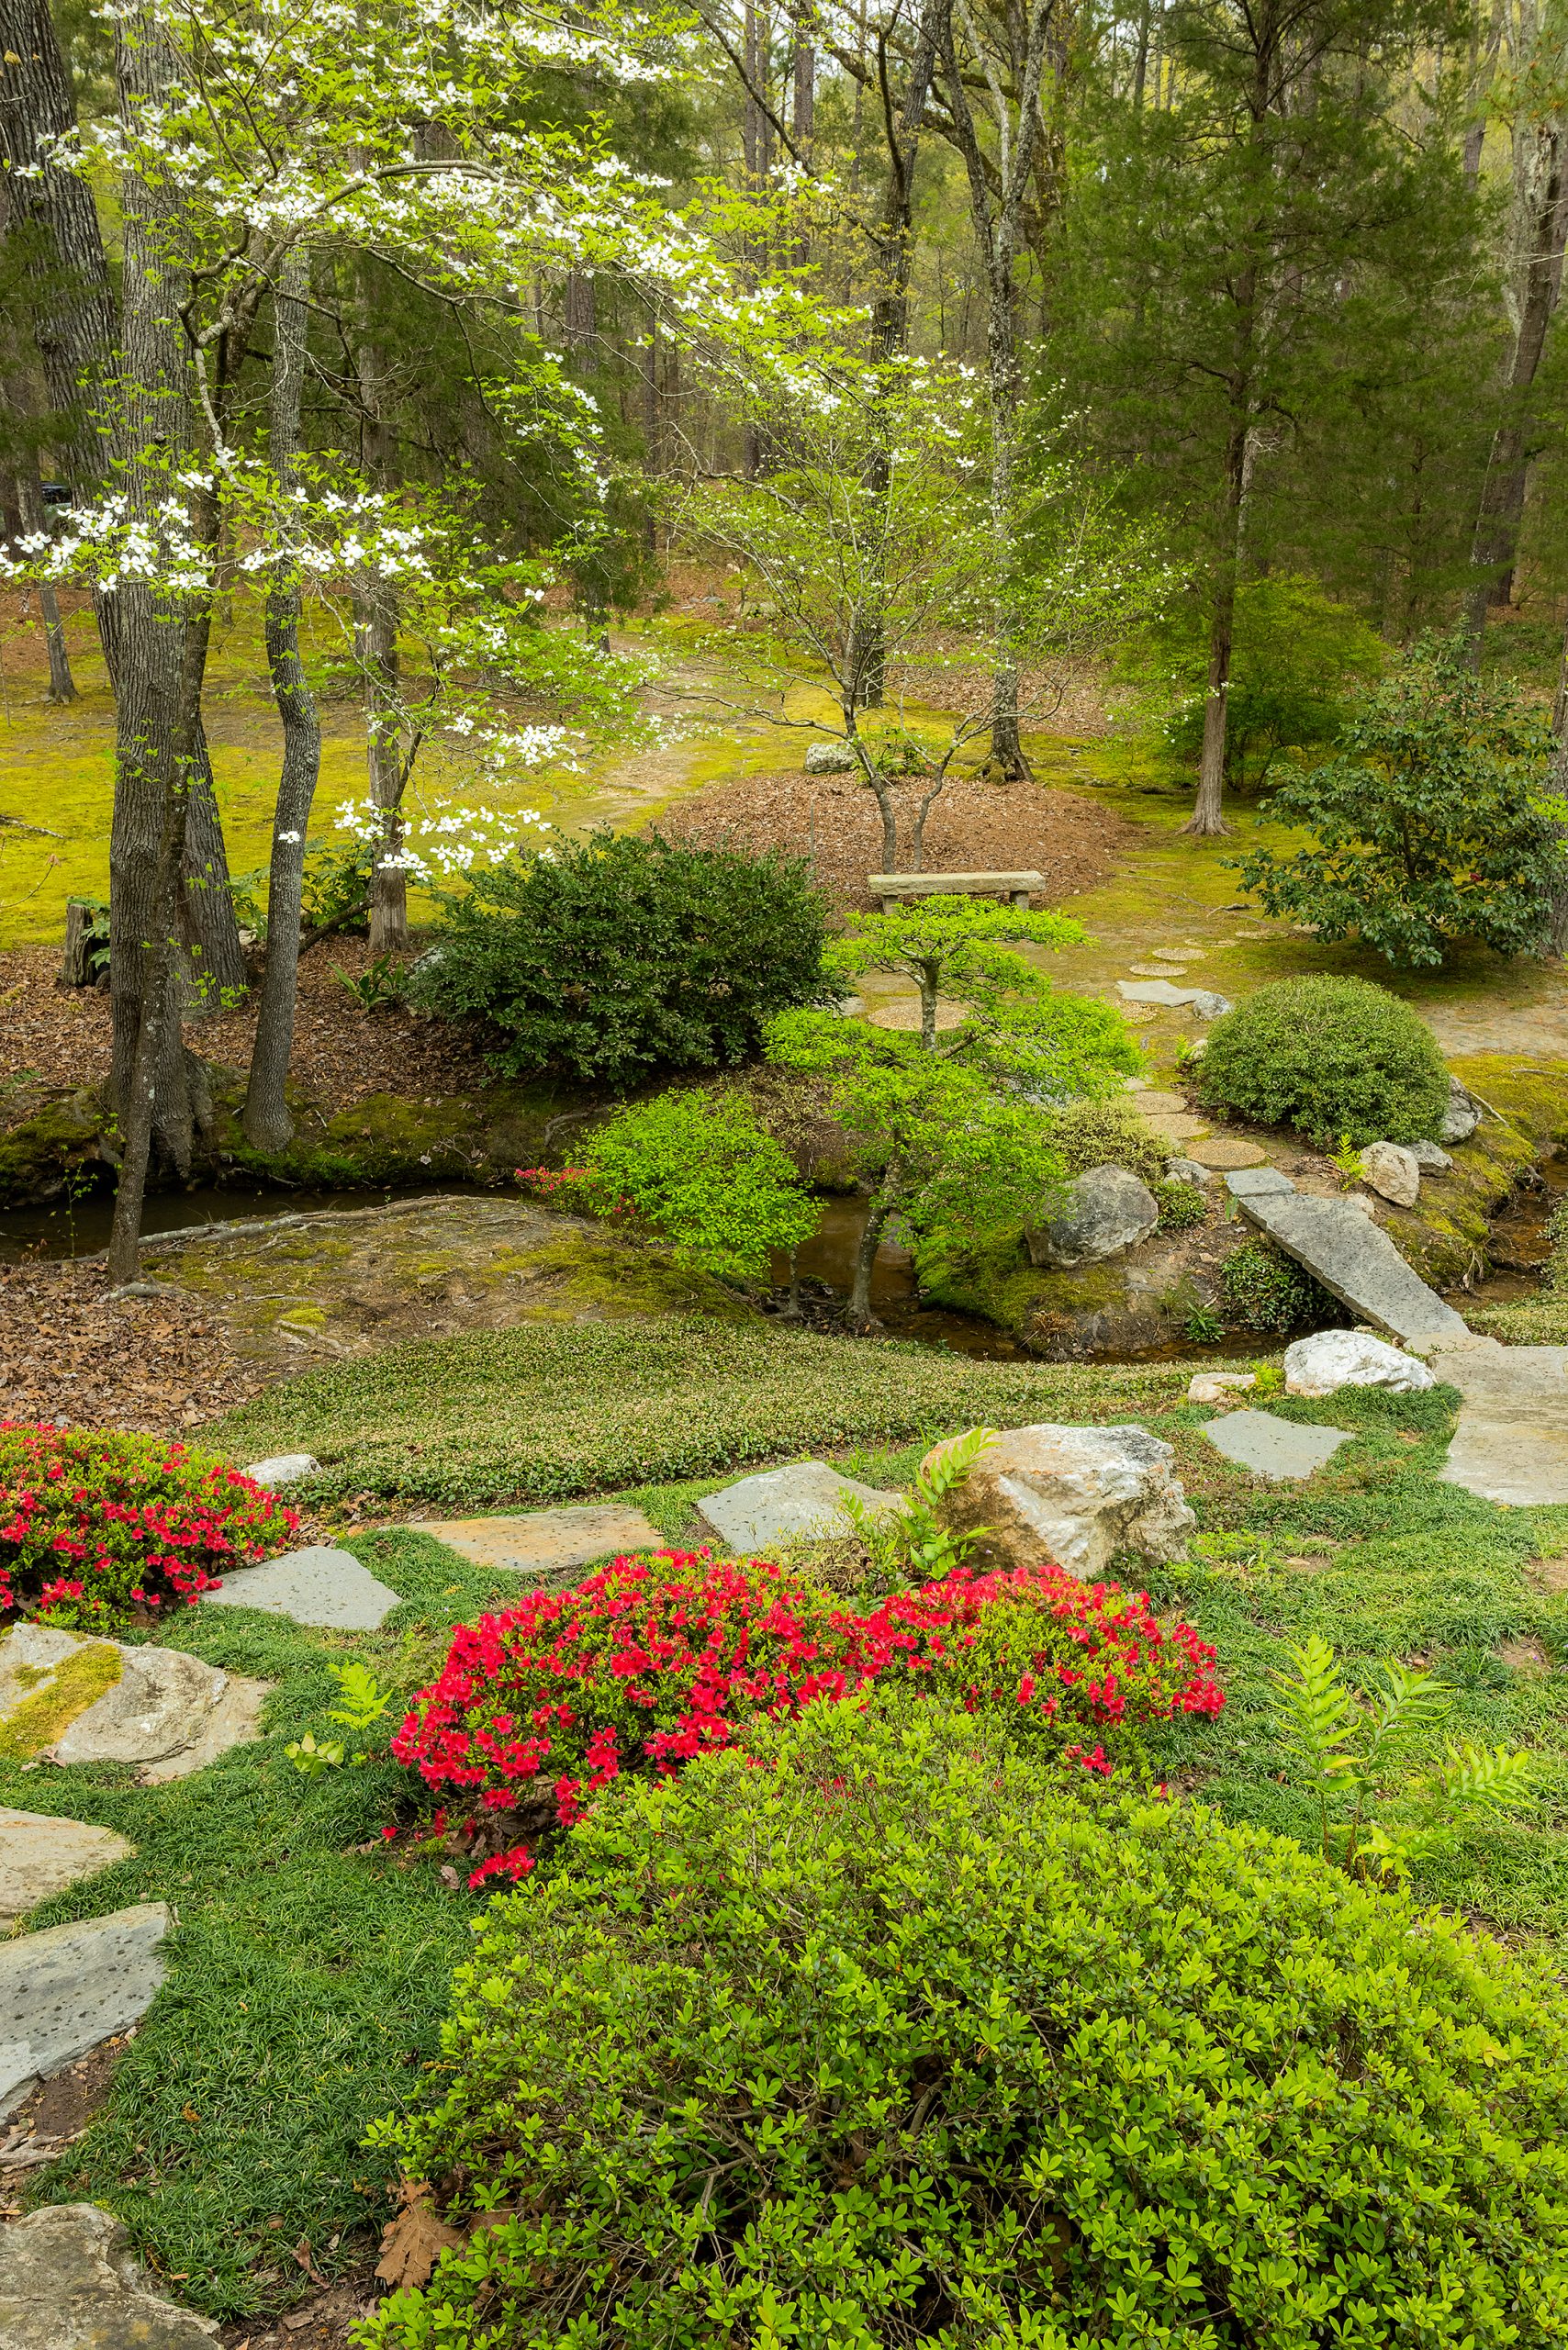 Japanese gardeners should carefully select stones with a surface for retaining soil, edging ponds or streams, or accenting shrubs. They should also ensure stepping stones are balanced and partially buried instead of placed on top of the earth. And although precision is important, perfection is never the purpose. 